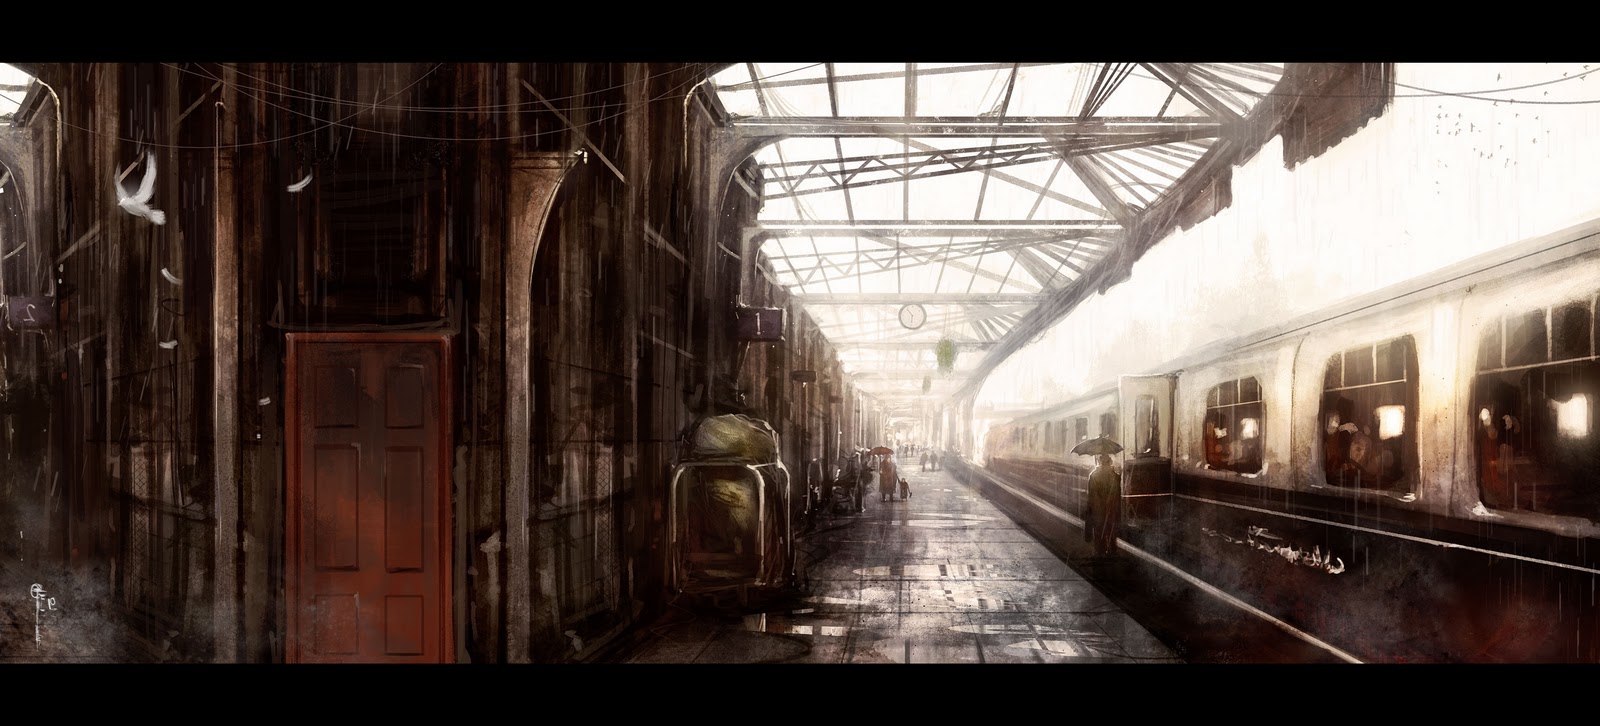 Tom Edwards Concepts Ye old train station + personal